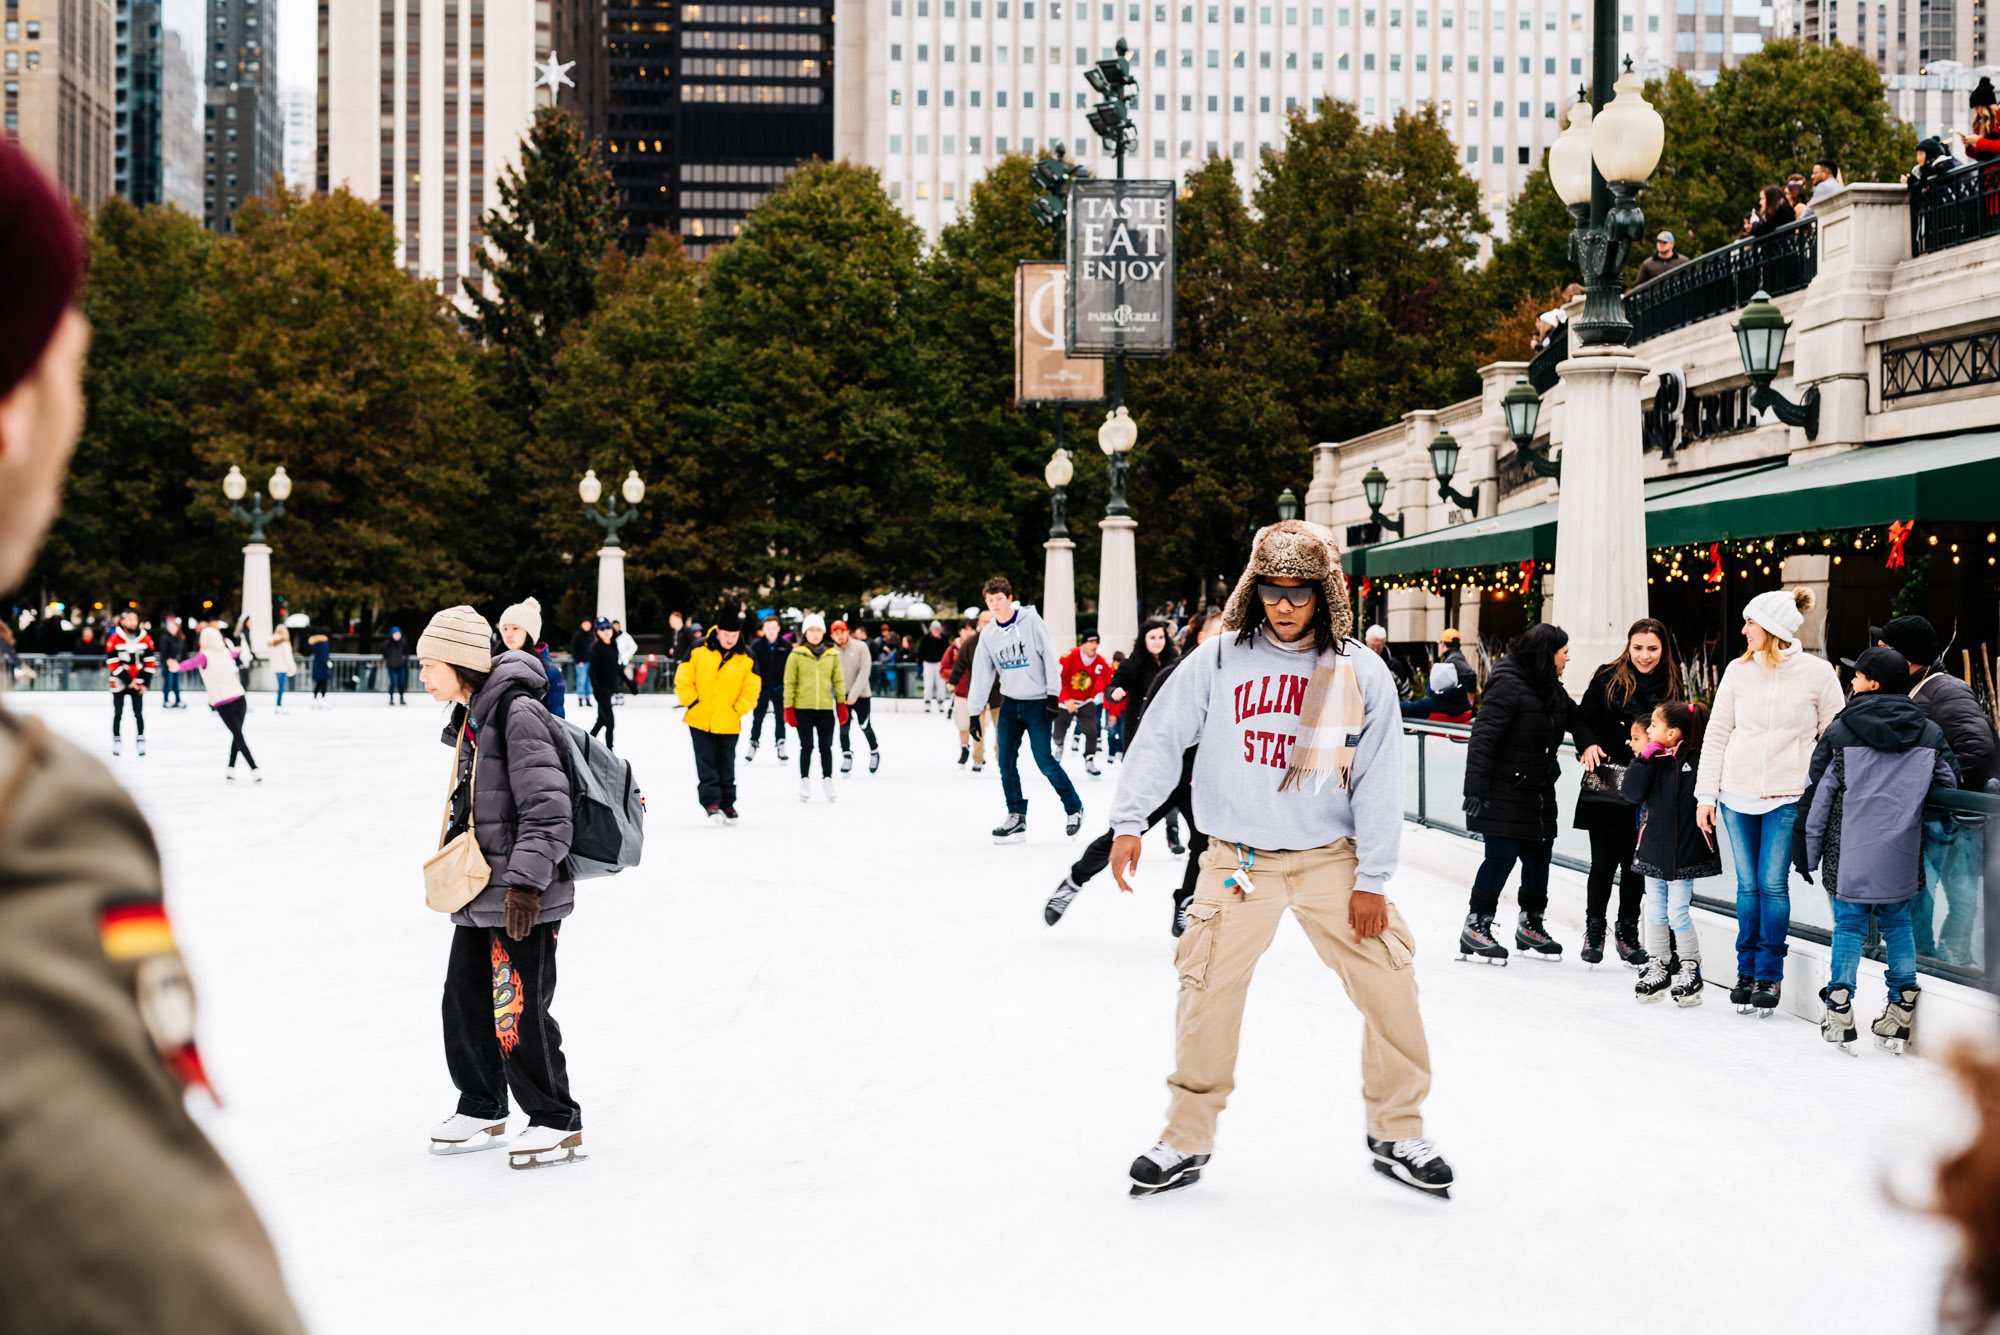 Jeff On The Road - Travel - Chicago - What to do - Millenium Park - Ice Skating Rink - All photos are under Copyright © 2017 Jeff Frenette Photography / dezjeff. To use the photos, please contact me at dezjeff@me.com.